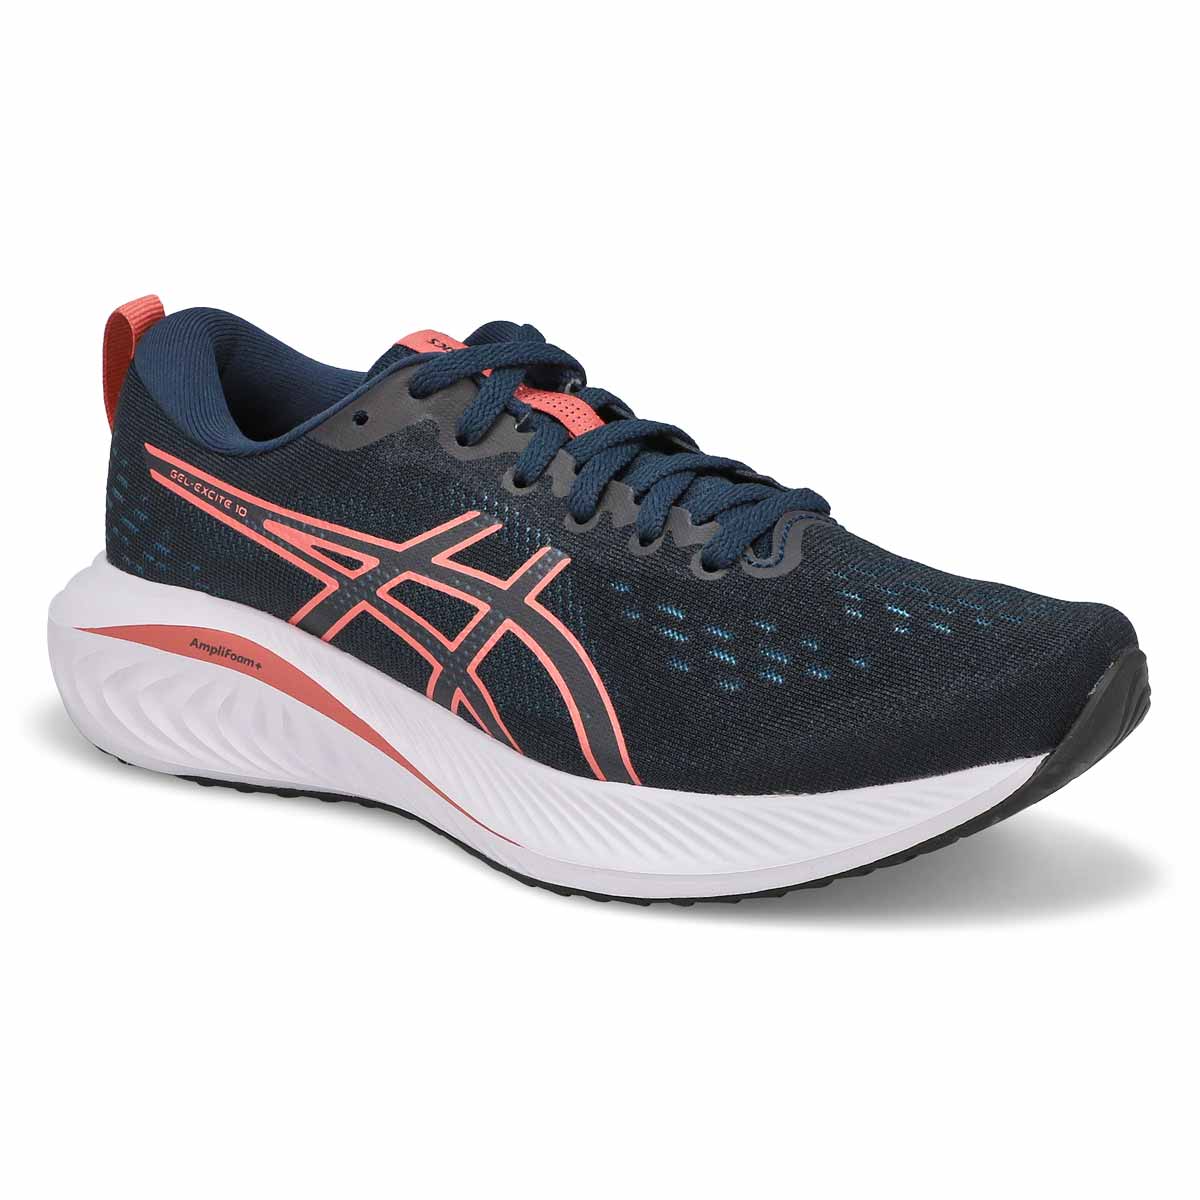 ASICS Women's Gel-Excite 10 Lace Up Sneaker - | SoftMoc.com